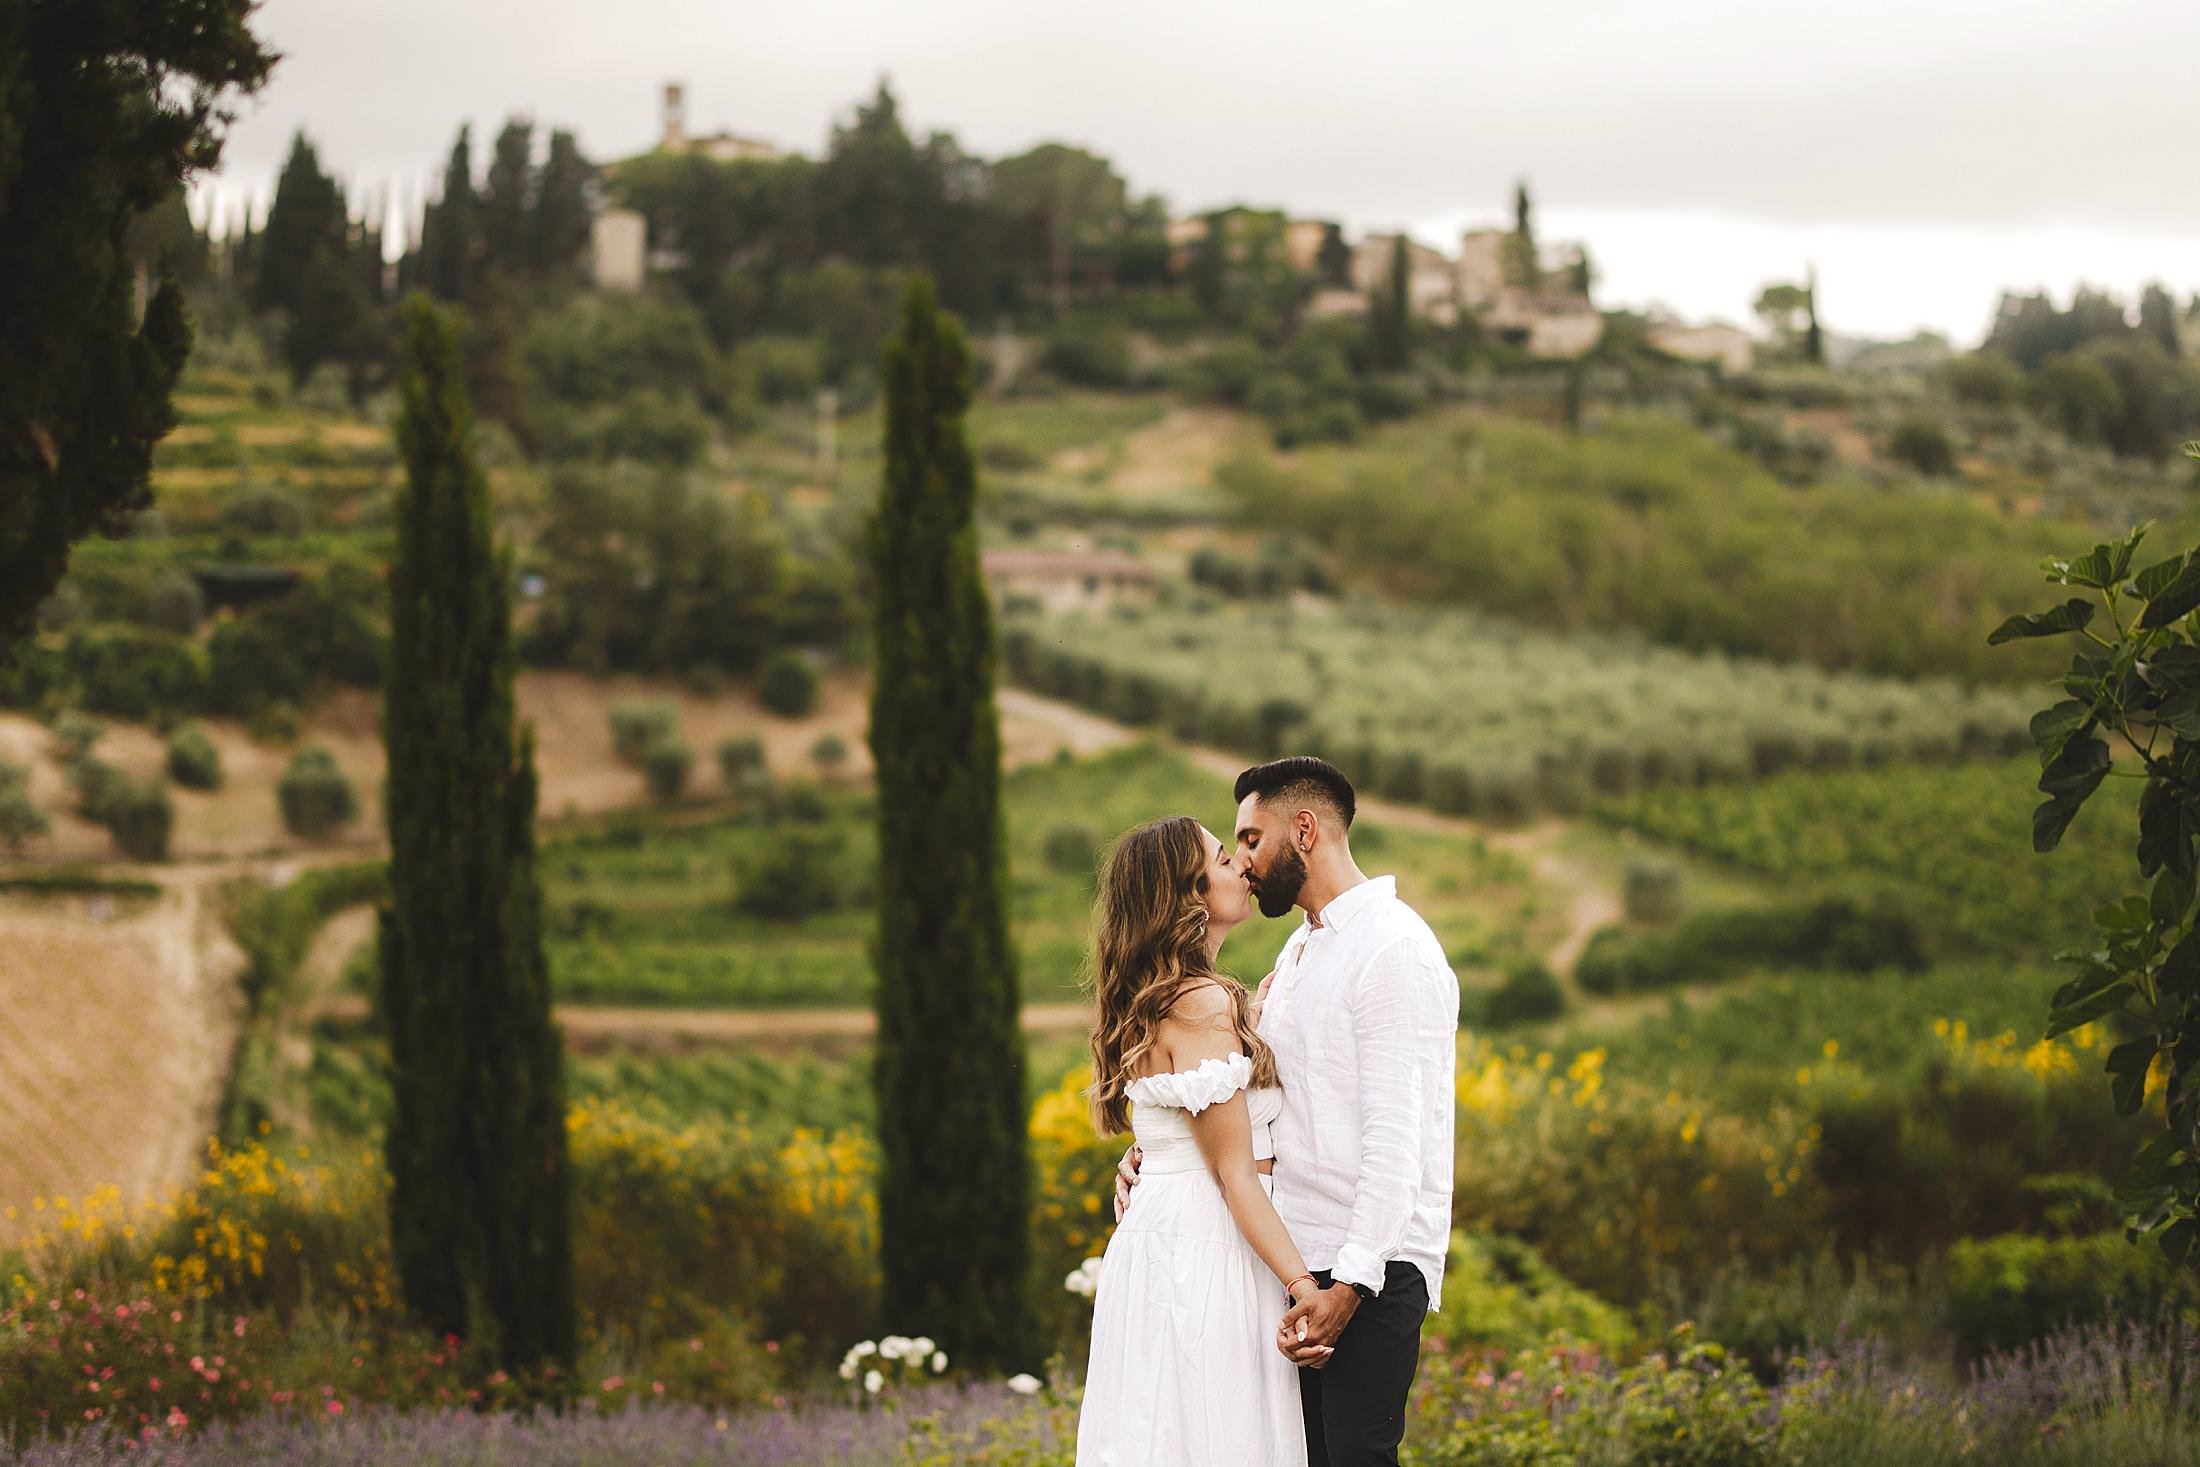 Exclusive and charming secret proposal photo shoot in Chianti countryside at Borgo del Cabreo